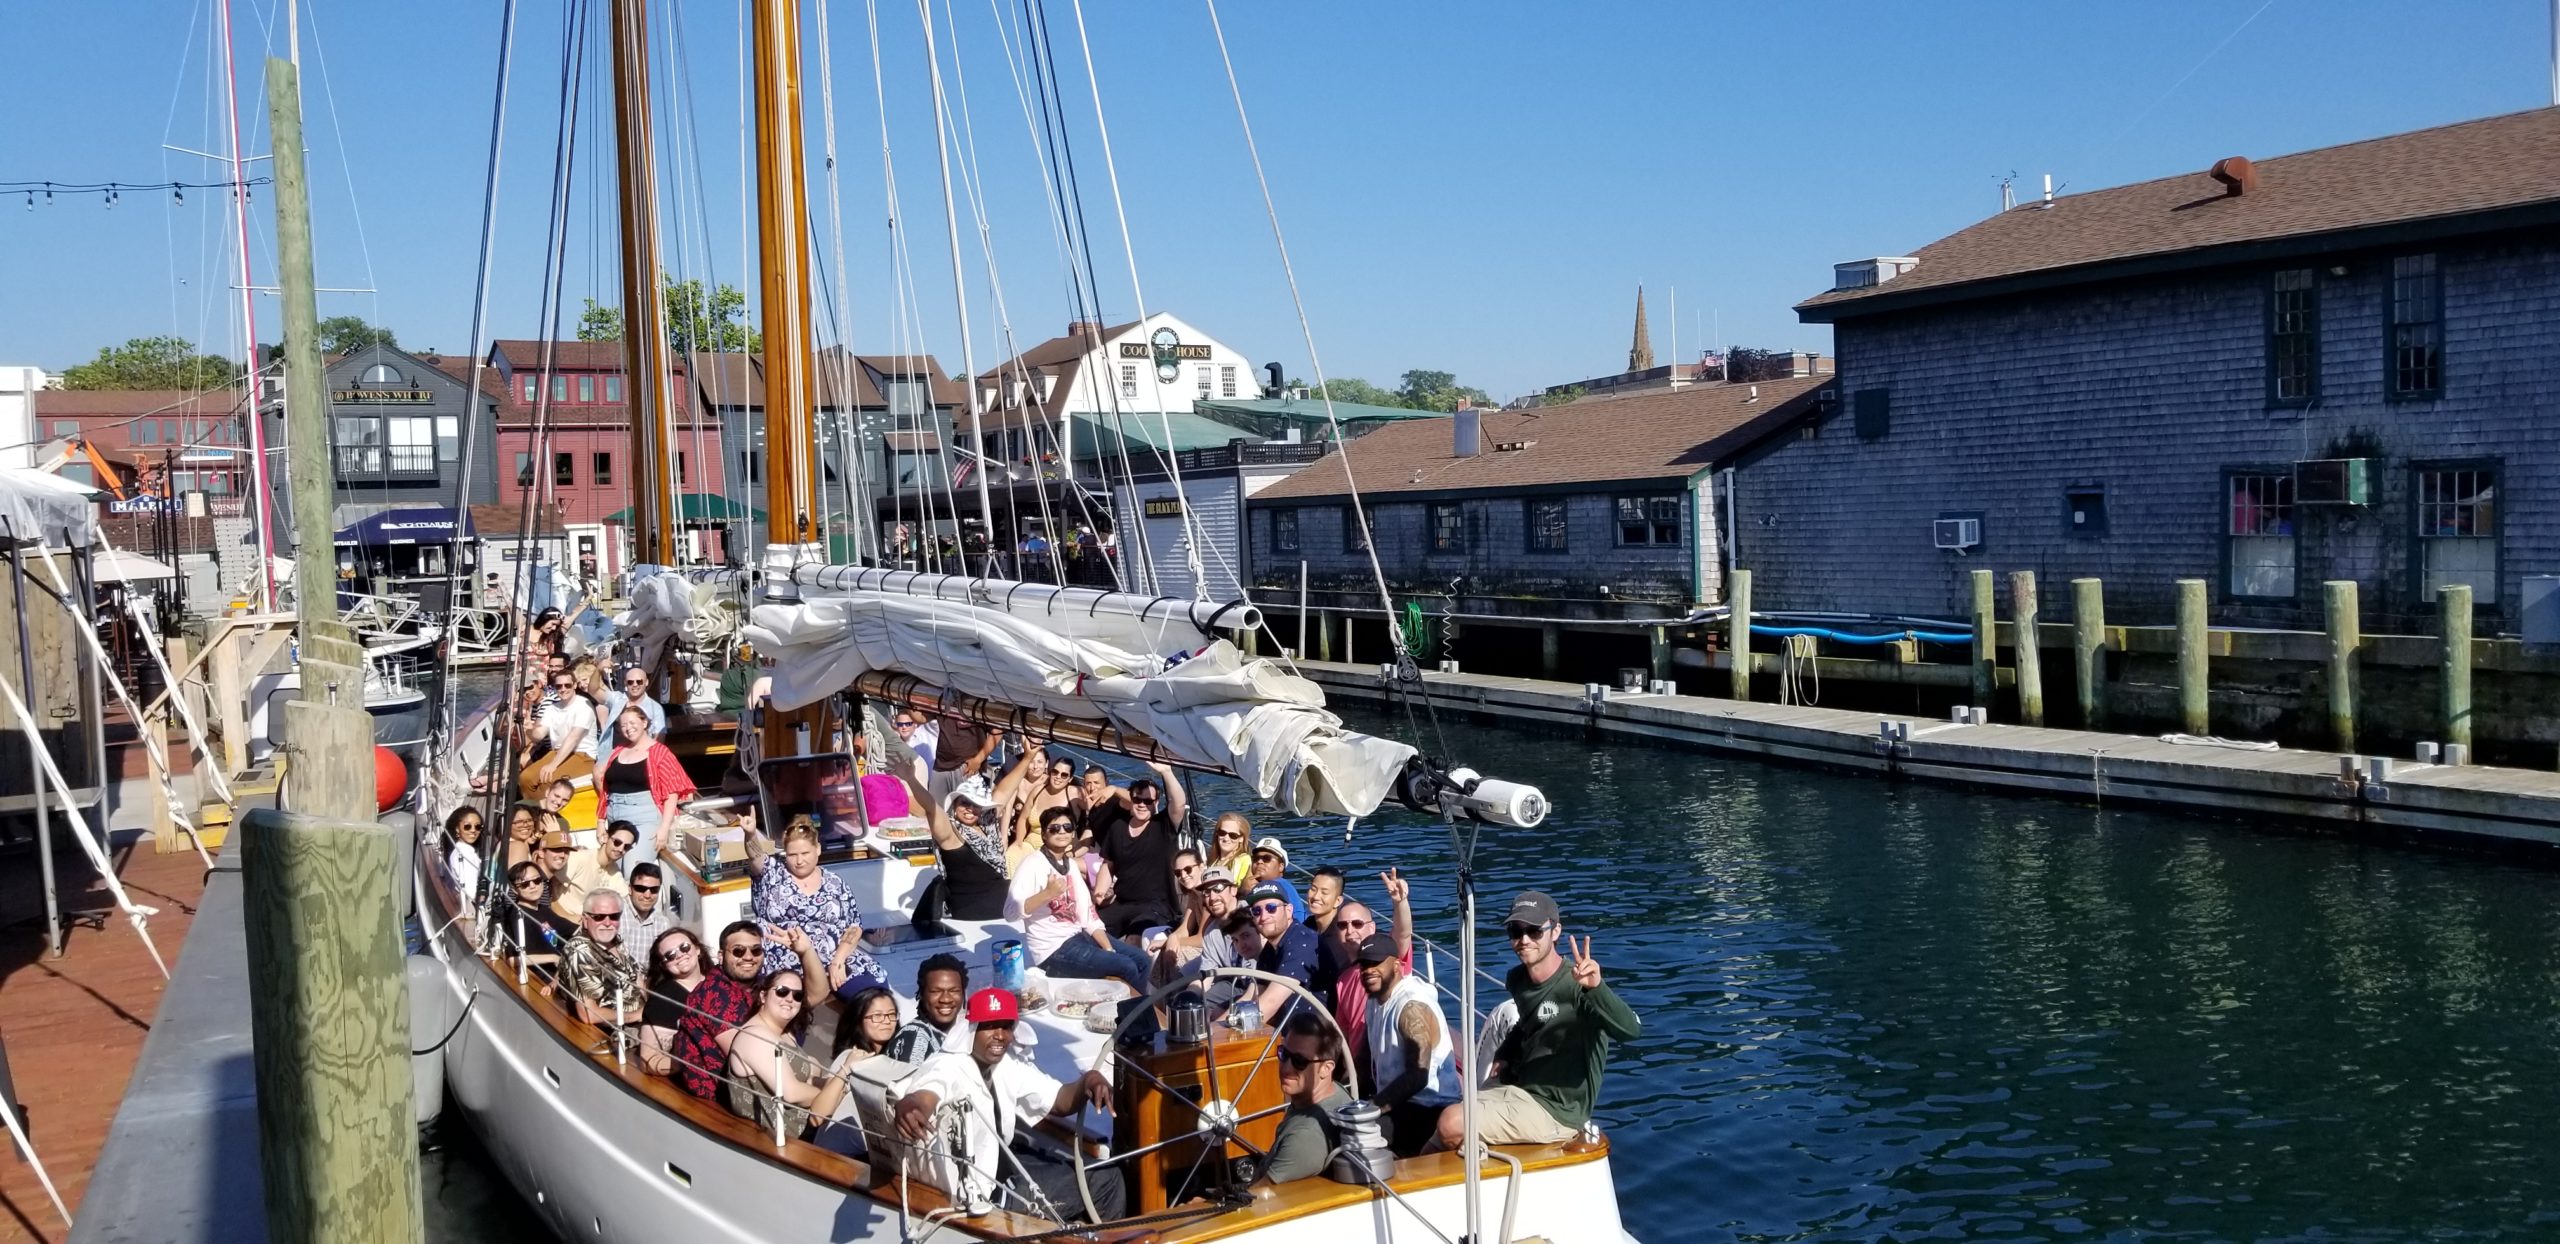 Group of tourists aboard a yacht at Bannister's Wharf - an experience included in the Newport Sail Tour.